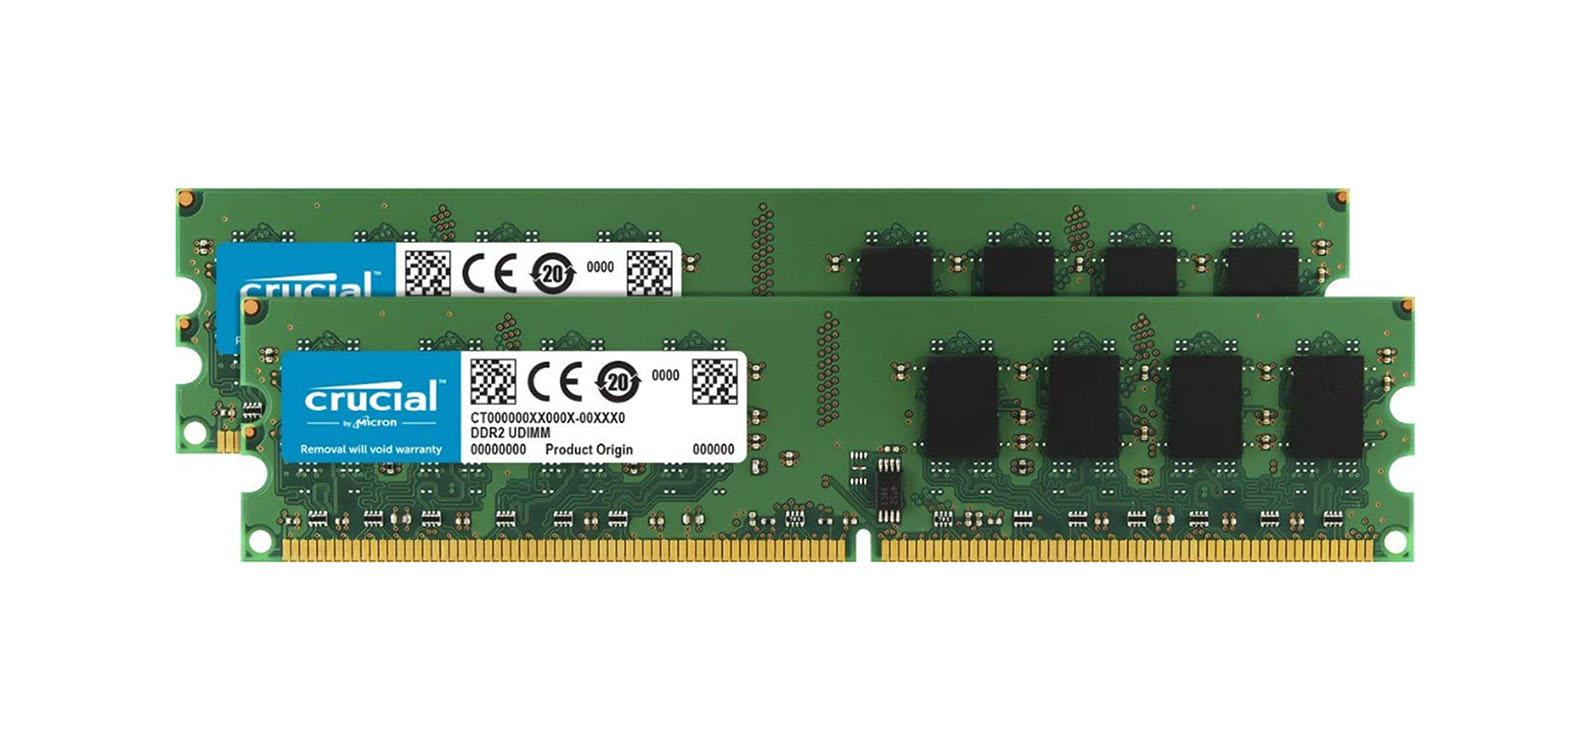 Crucial CT749192 8GB Kit (2 x 4GB) DDR2-667MHz PC2-5300 ECC Registered CL5 240-Pin DIMM Dual Rank Memory Upgrade for ASUS RS161-E5/PA2